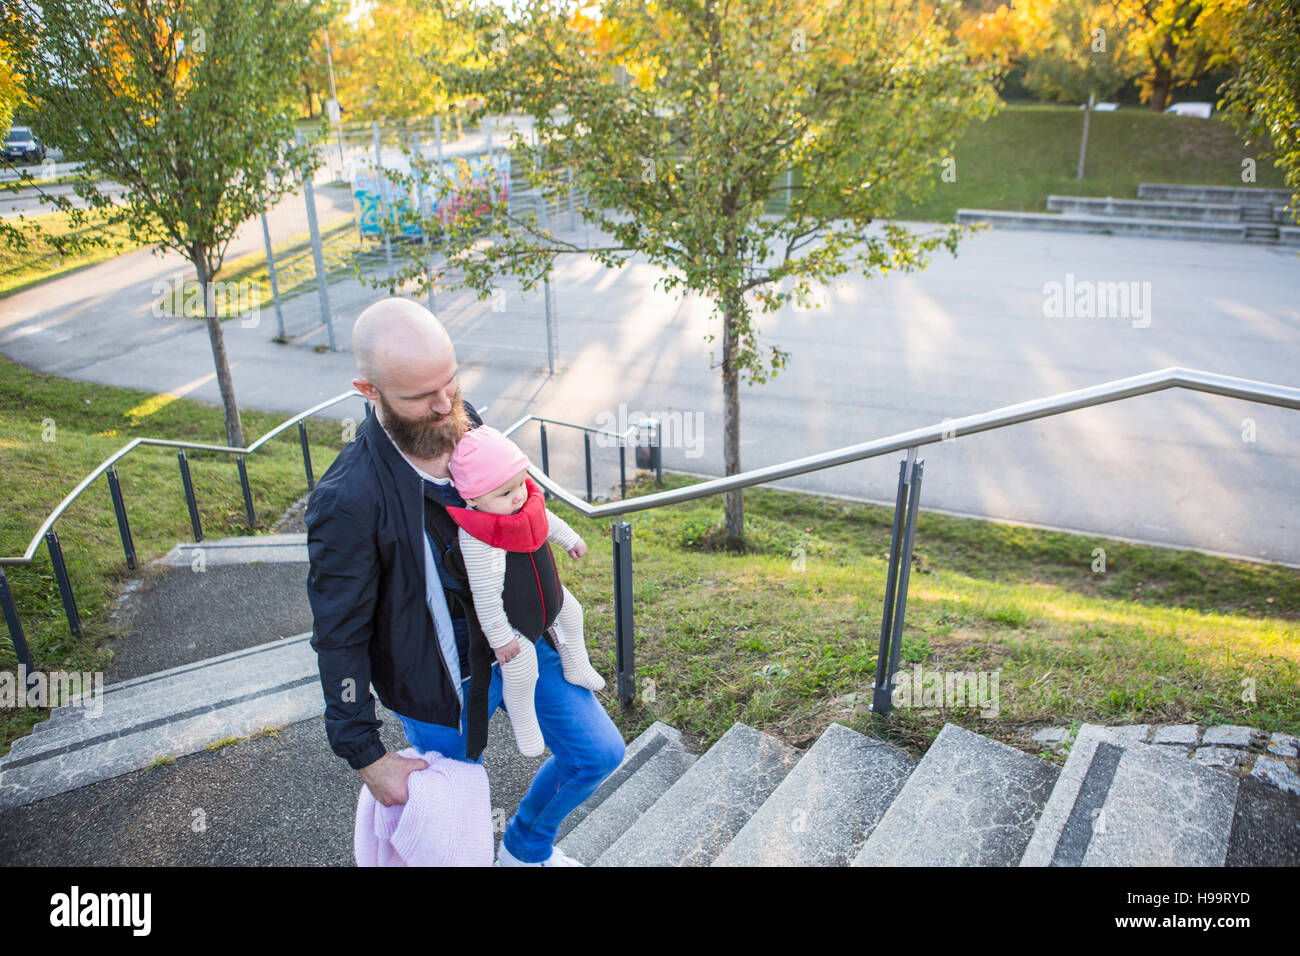 Father with baby girl in baby carrier walking up steps Stock Photo